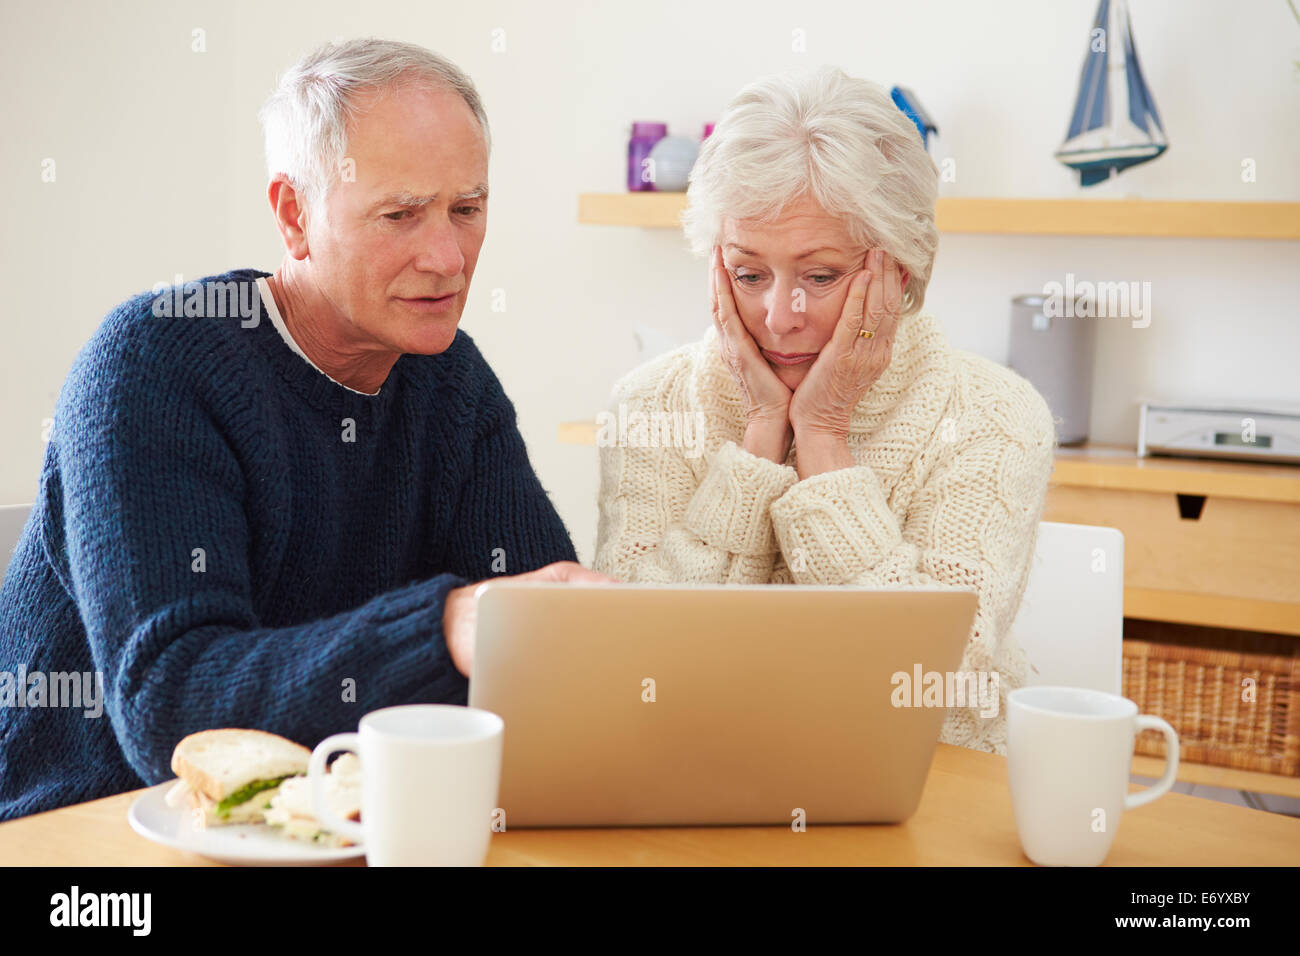 Senior Couple With Financial Problems Looking At Laptop Stock Photo